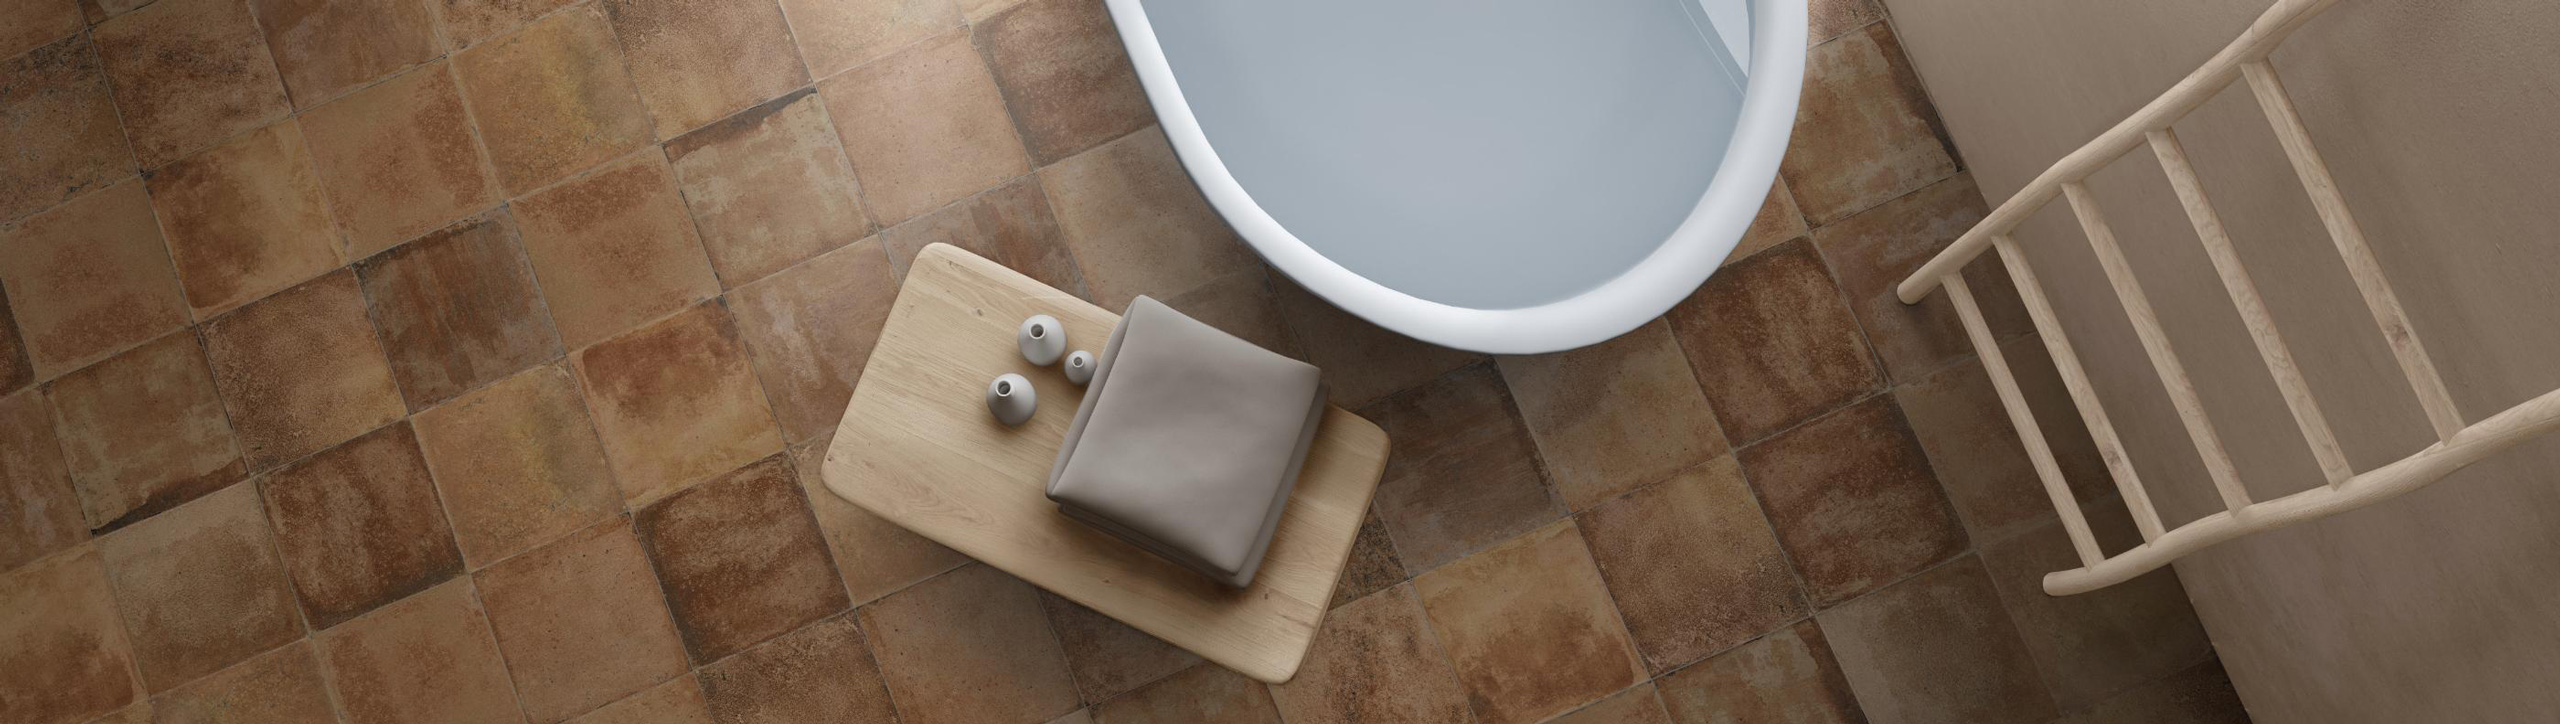 Products - Phils Tiles